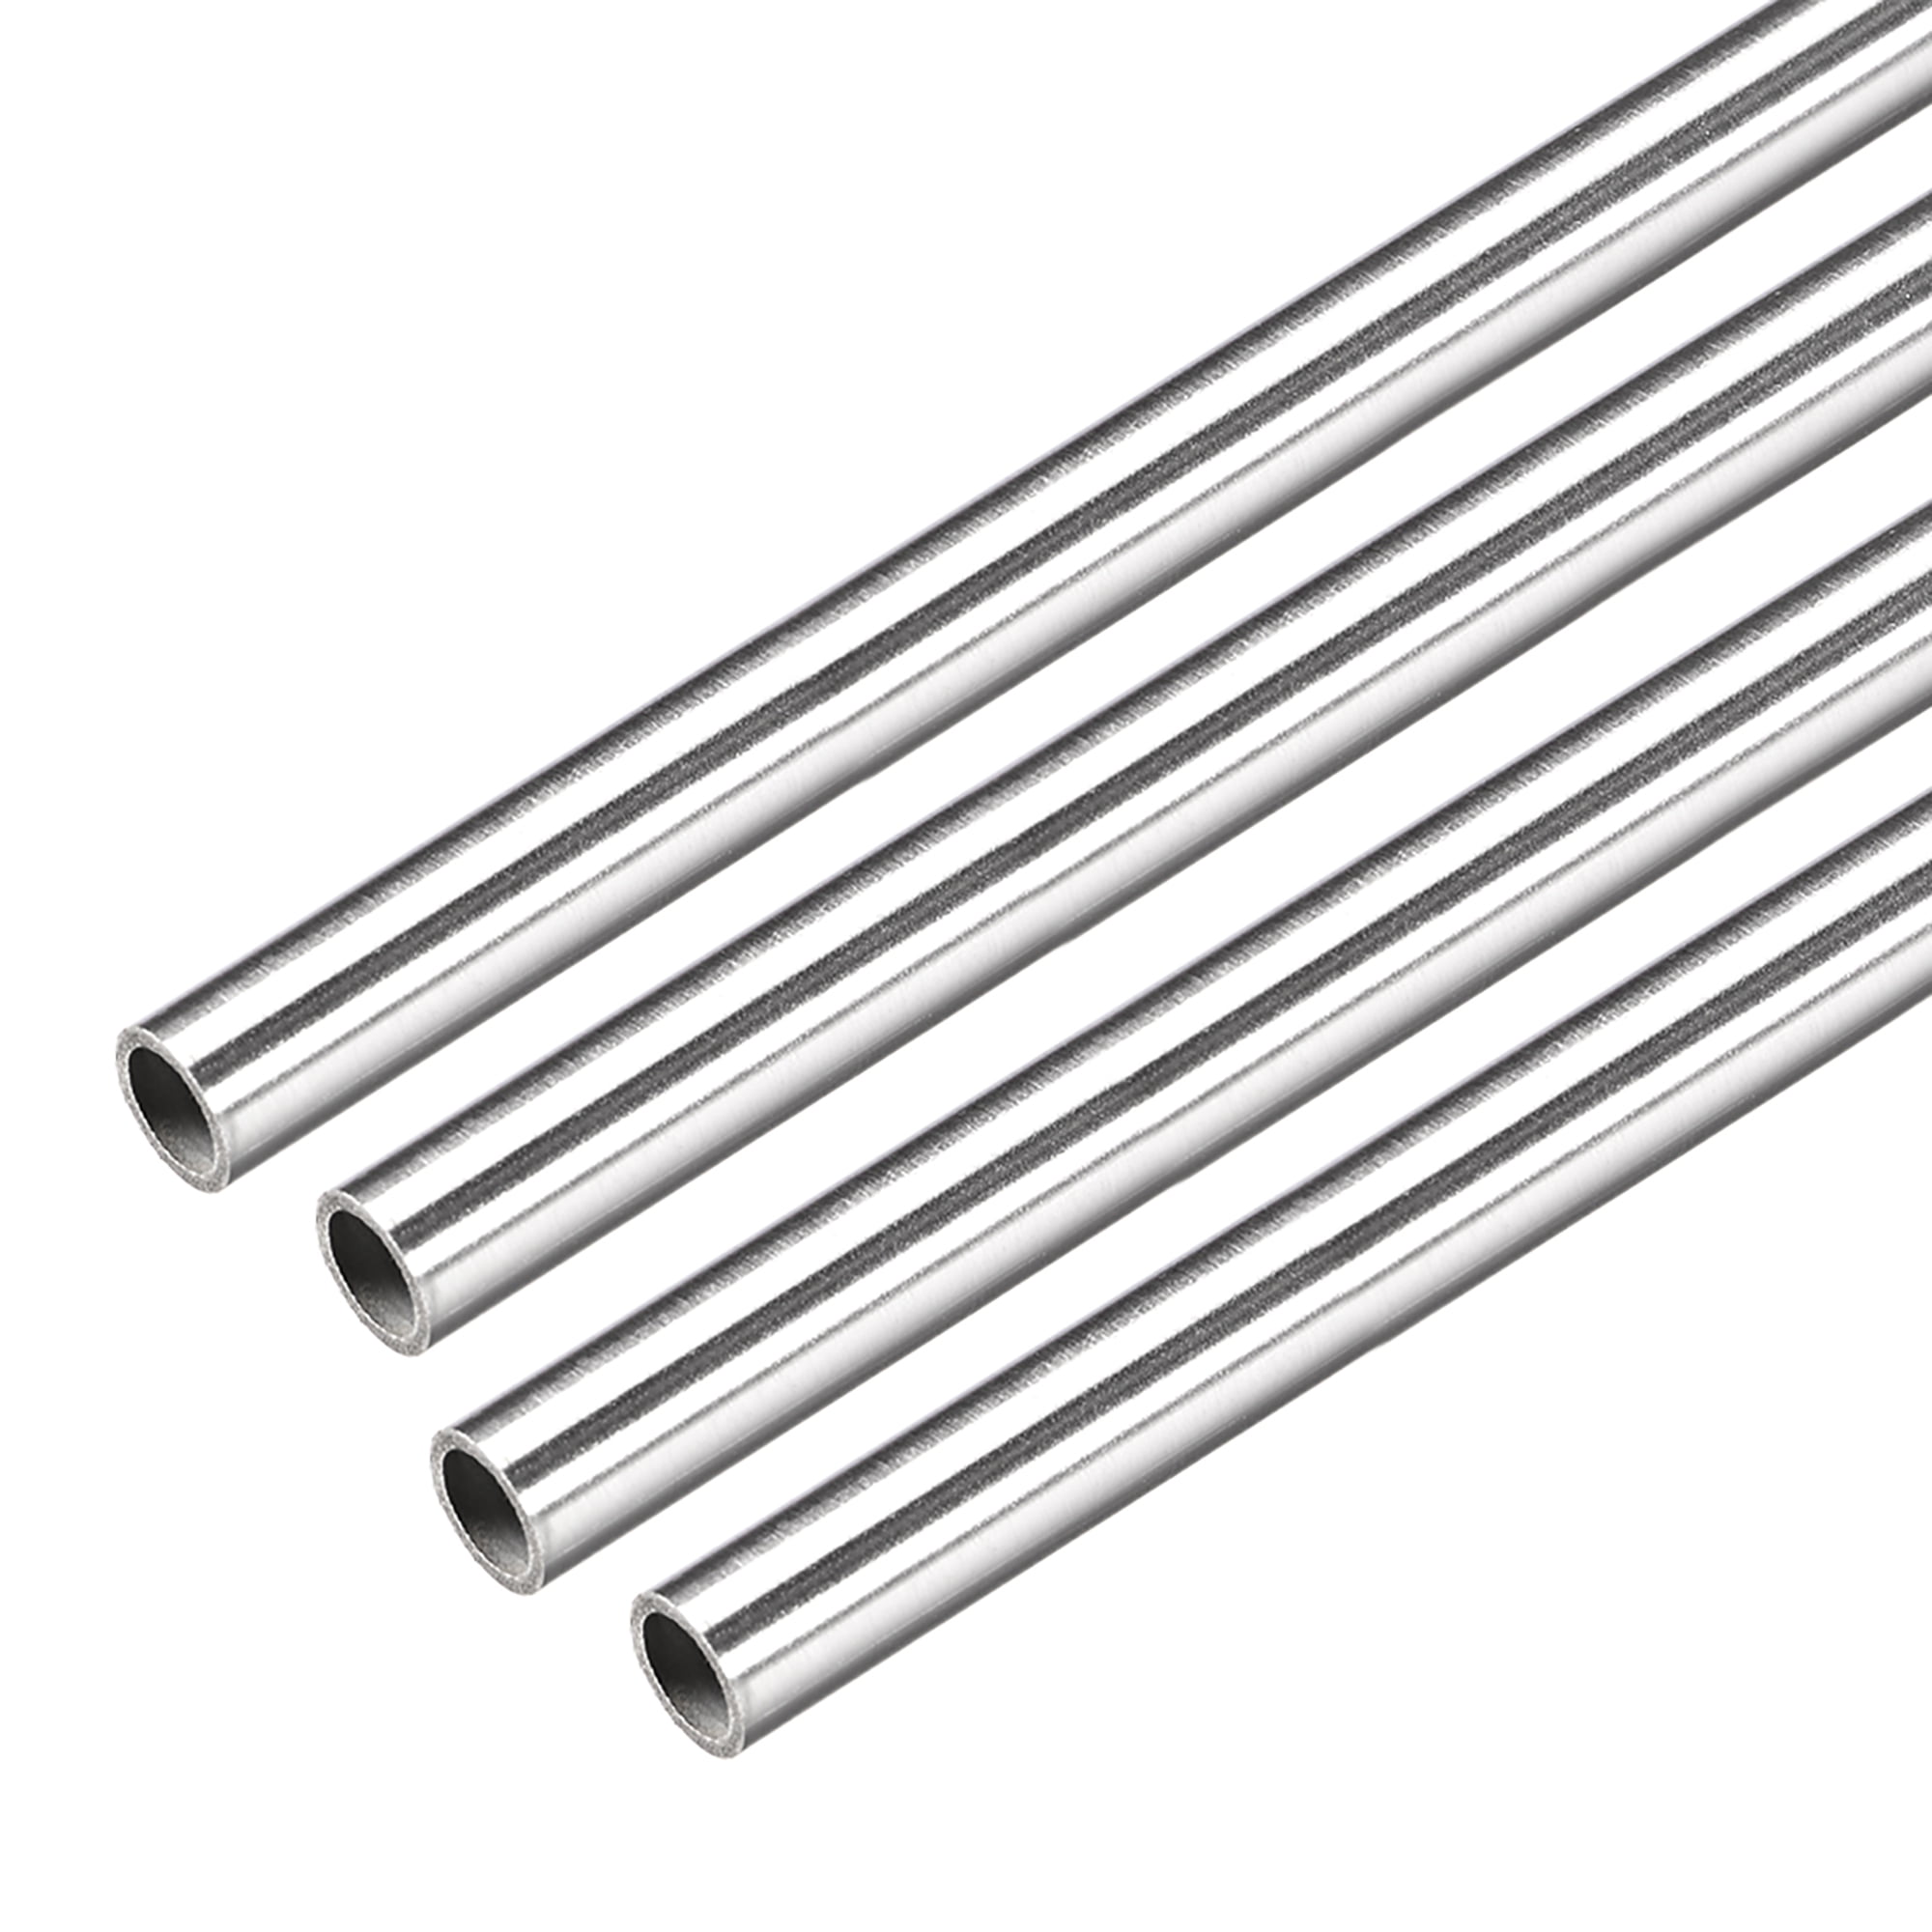 3Pcs 304 Stainless Steel Capillary Tube Pipe OD 6mm x 4mm ID,Length 500mm 20'' 